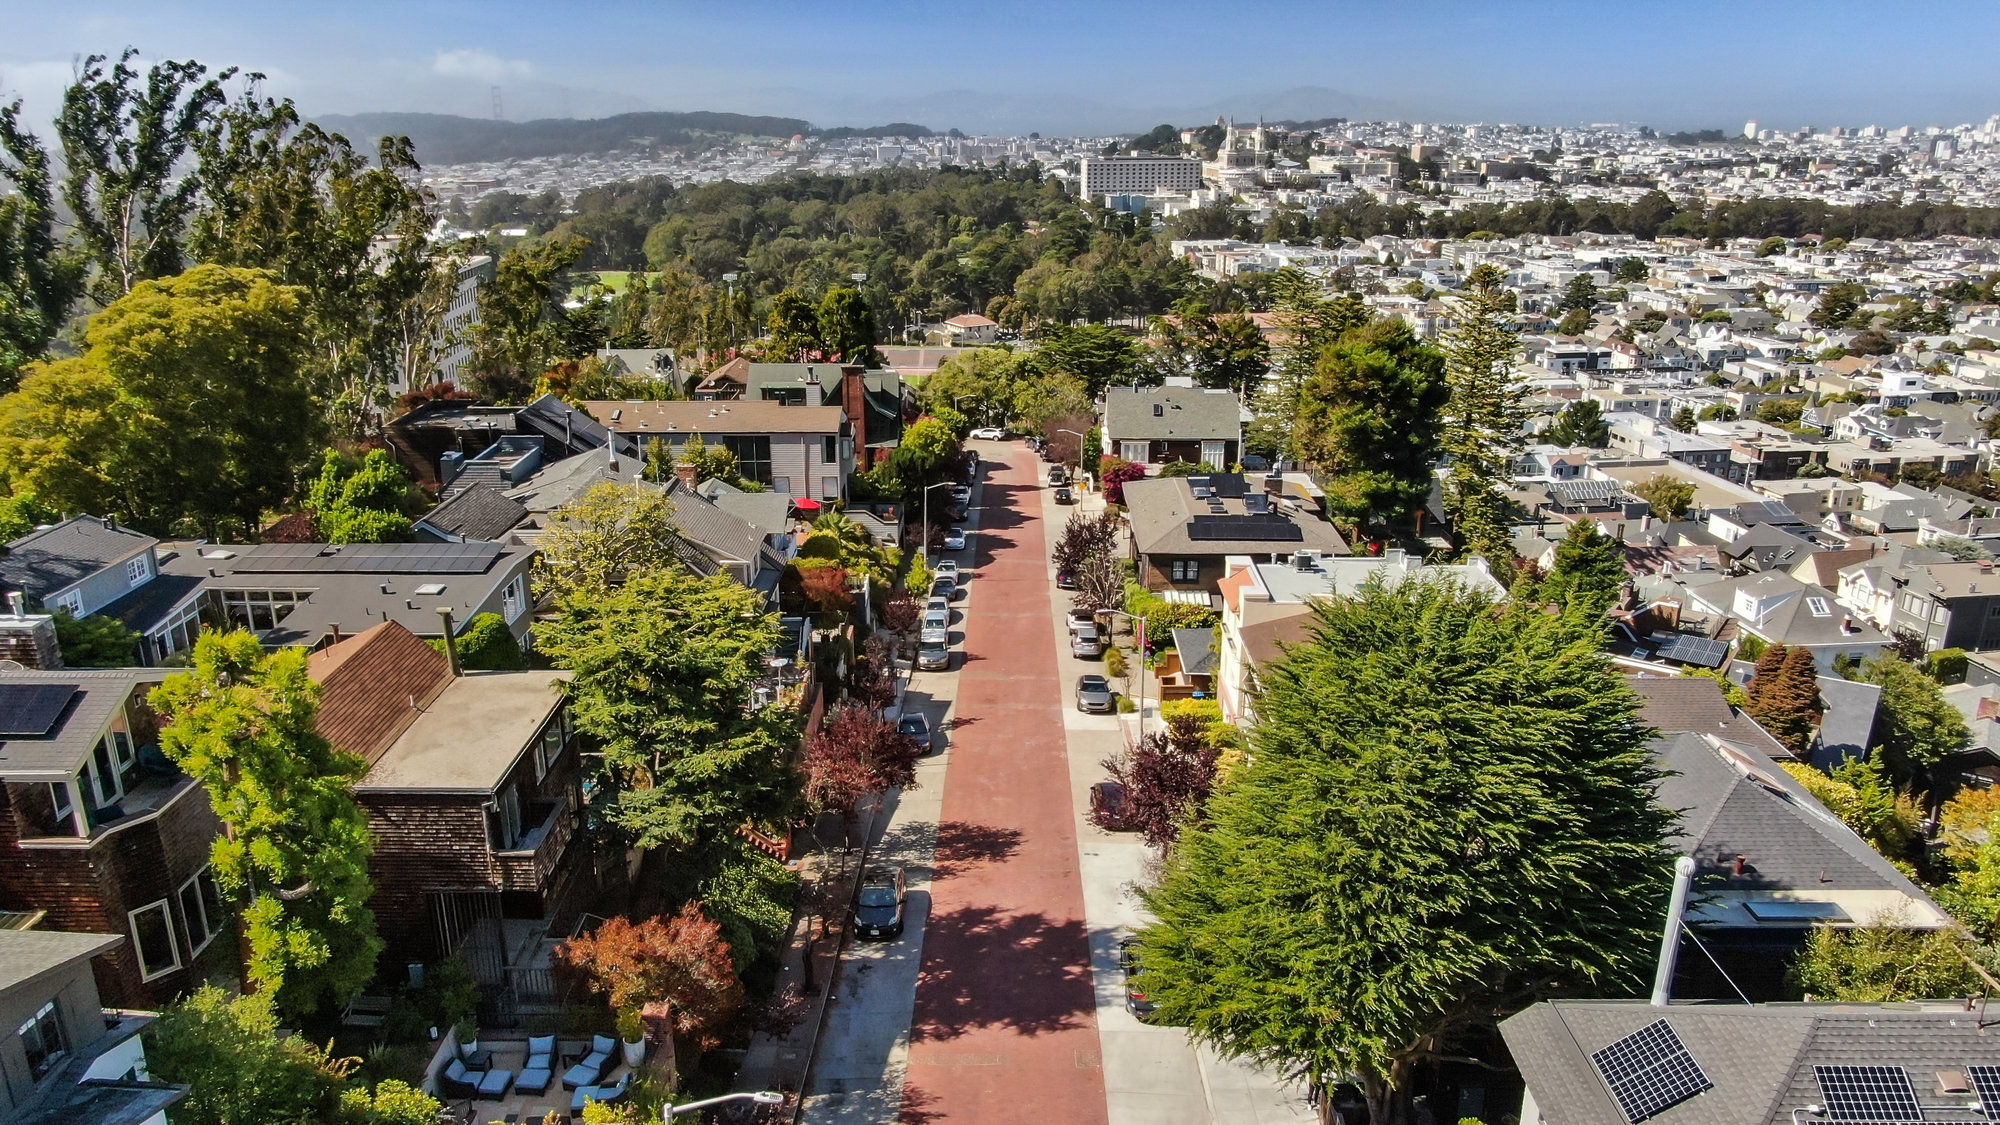 Exterior street view of 183 Edgewood Ave, showing Golden Gate Park and the San Francisco Bay in the background